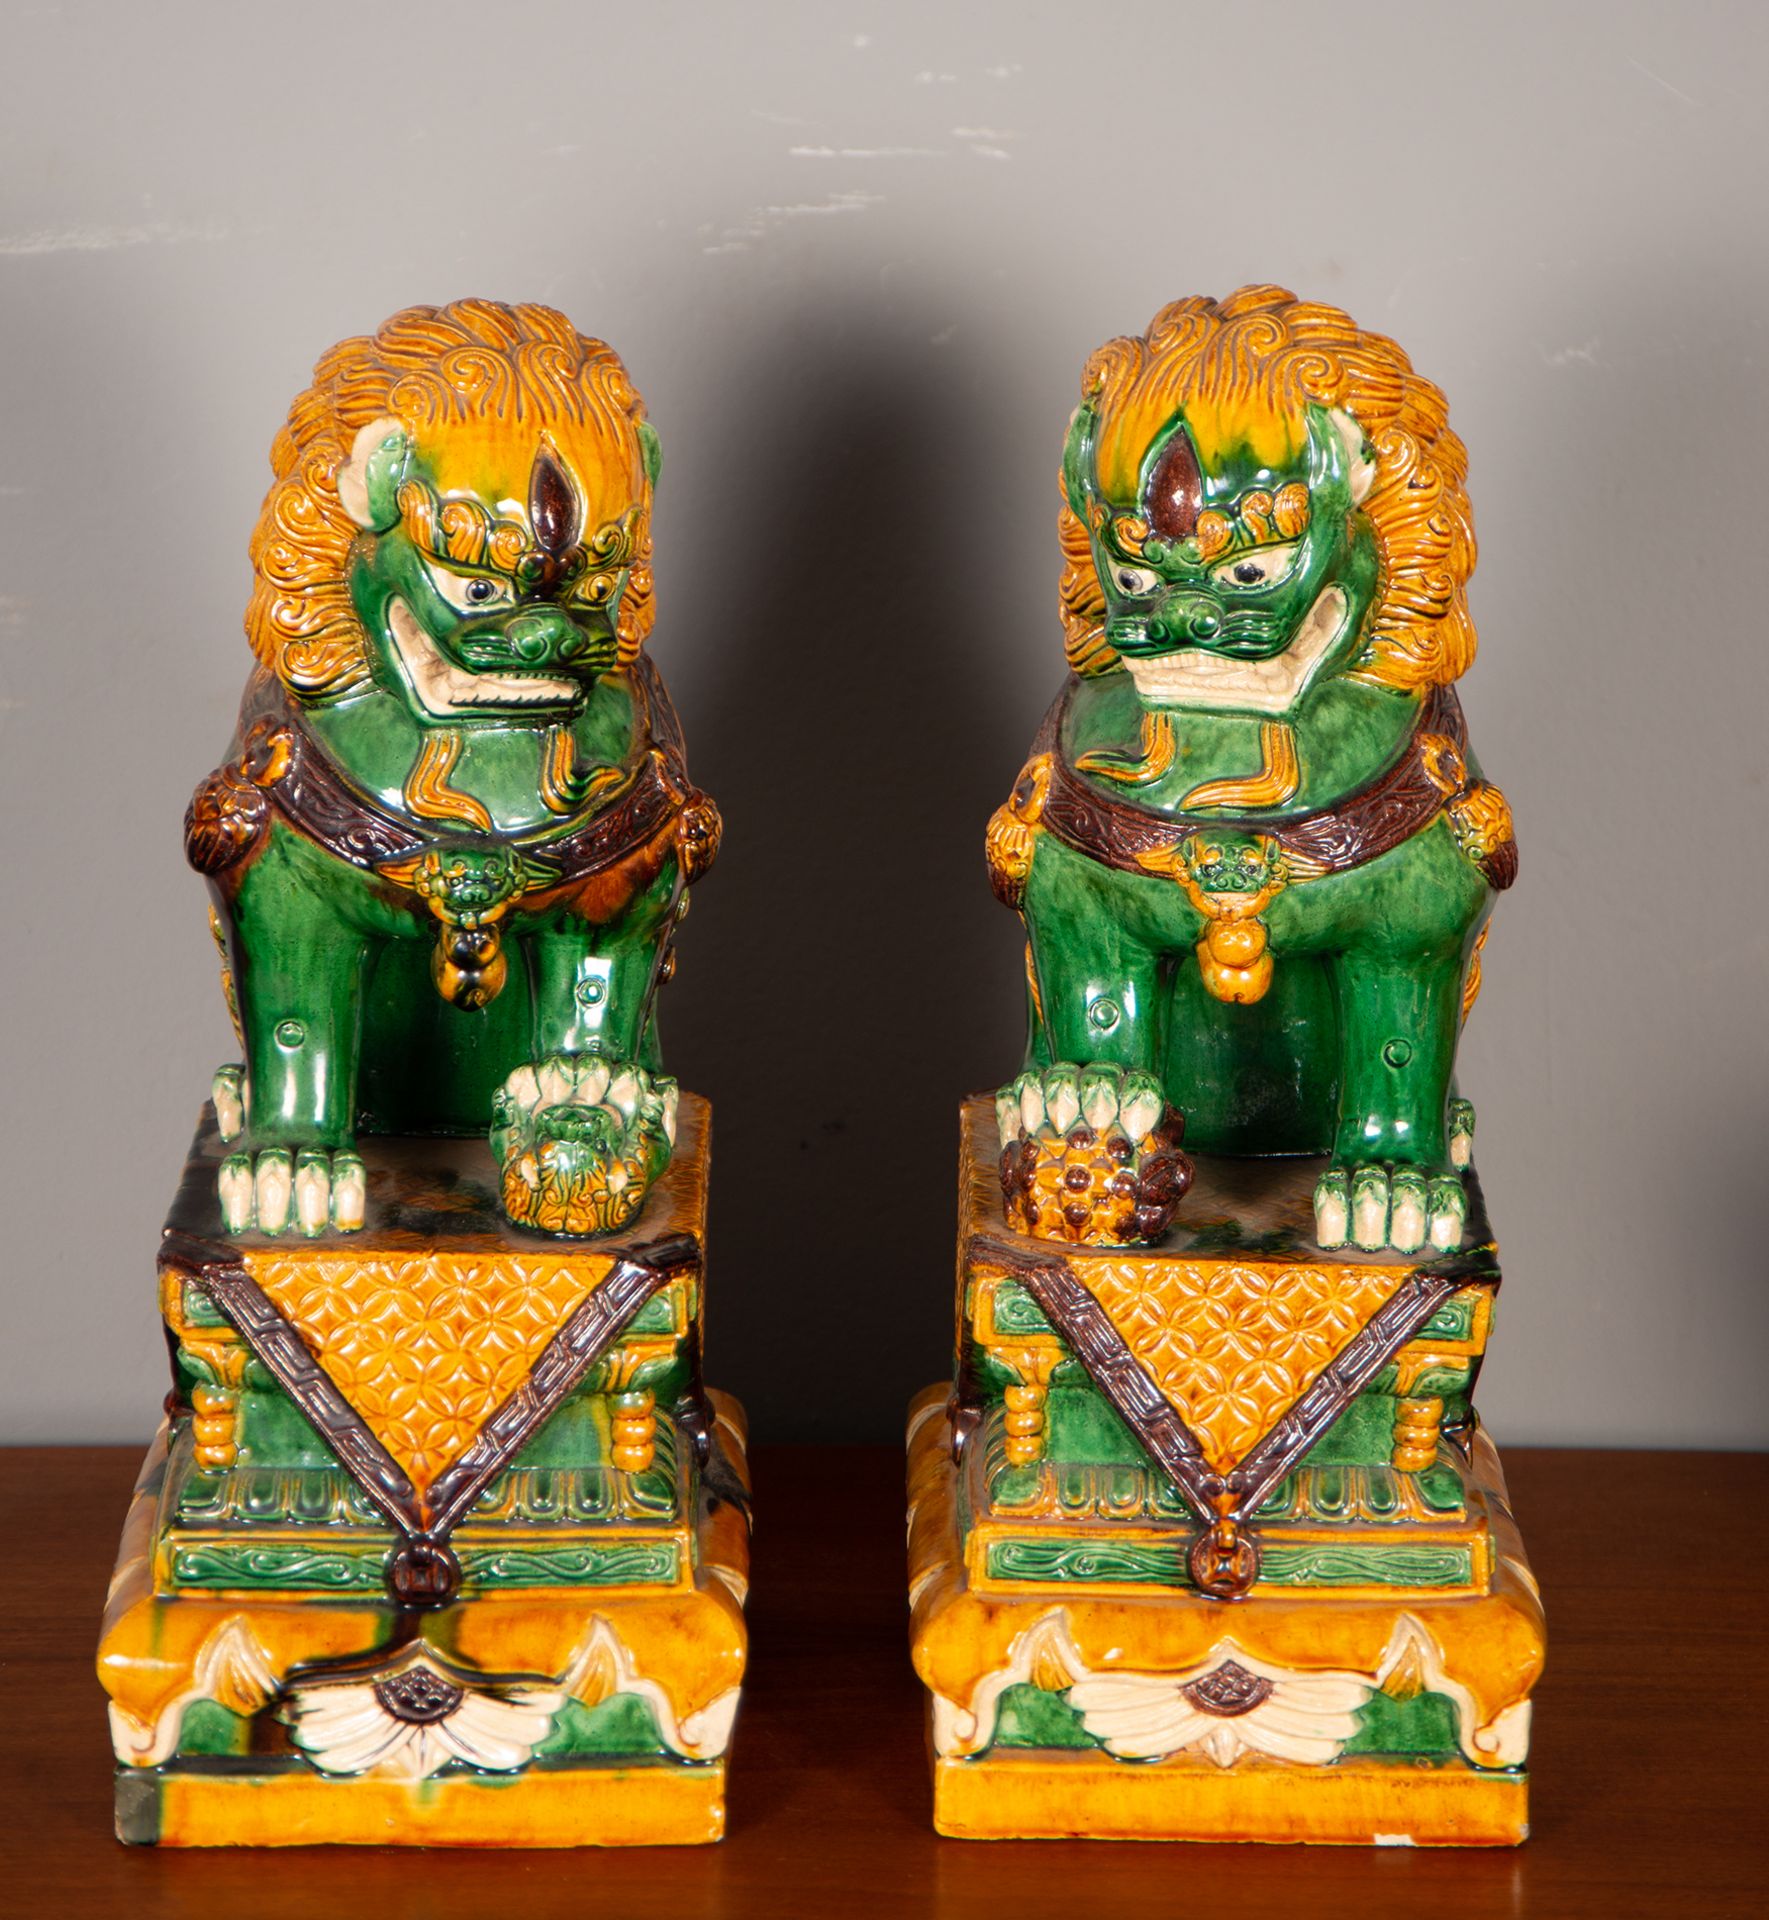 Pair of Foo lions, Chinese school of the 19th - 20th centuries